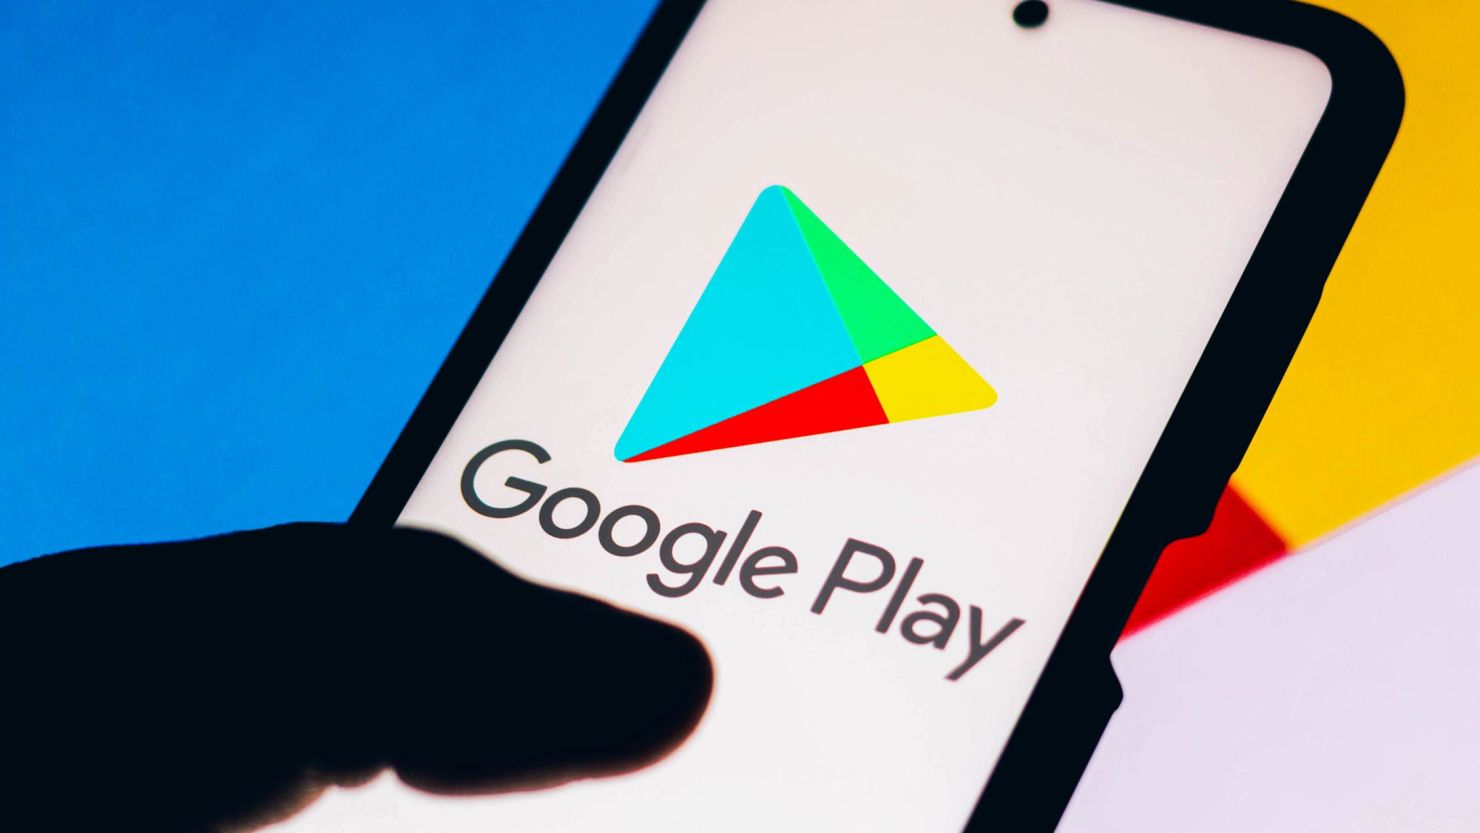 Google users will share $630 million after its Play store